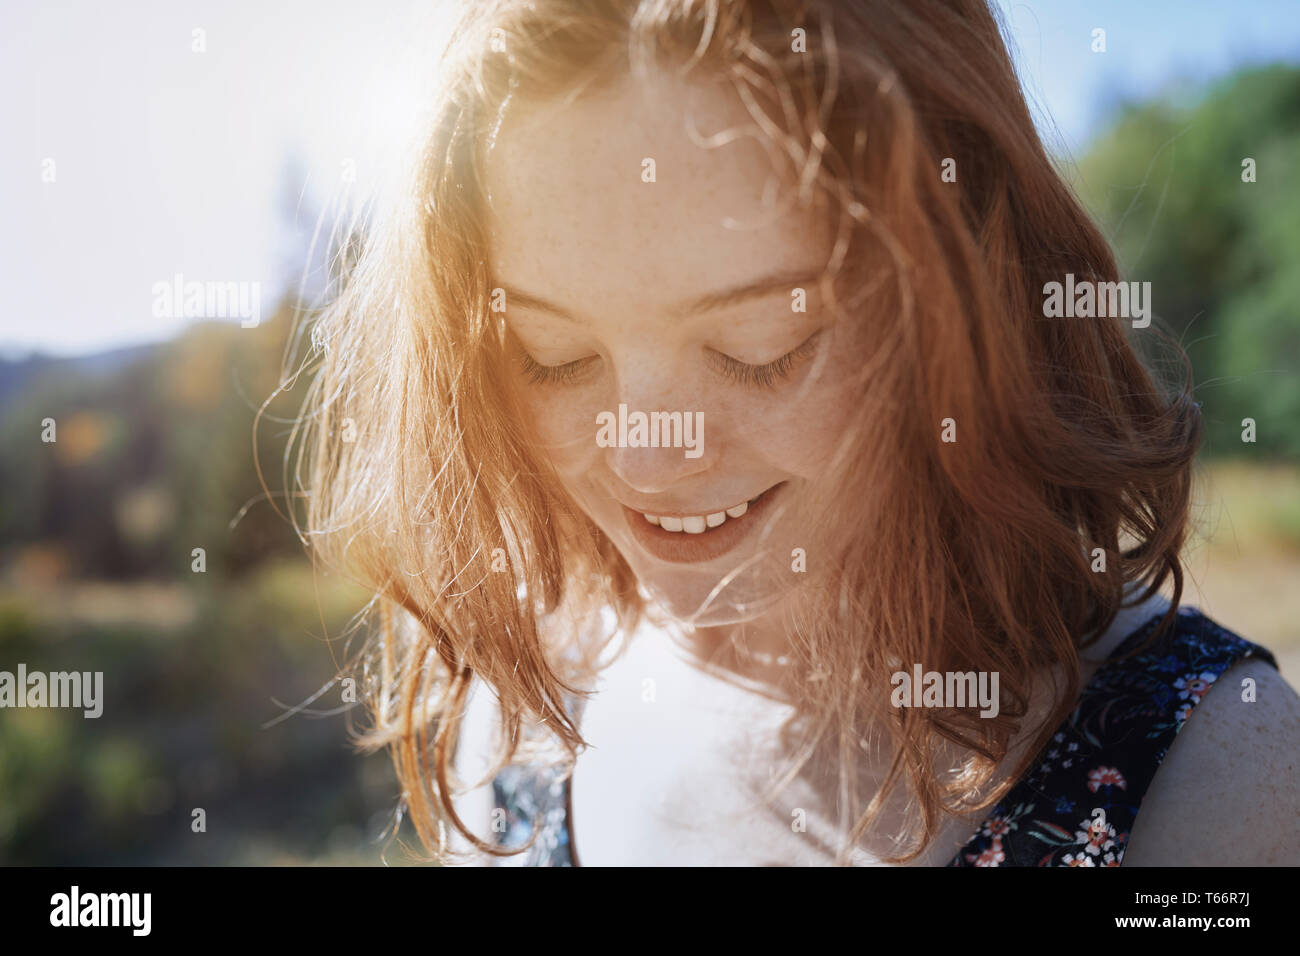 Smiling young woman with freckles looking down Stock Photo